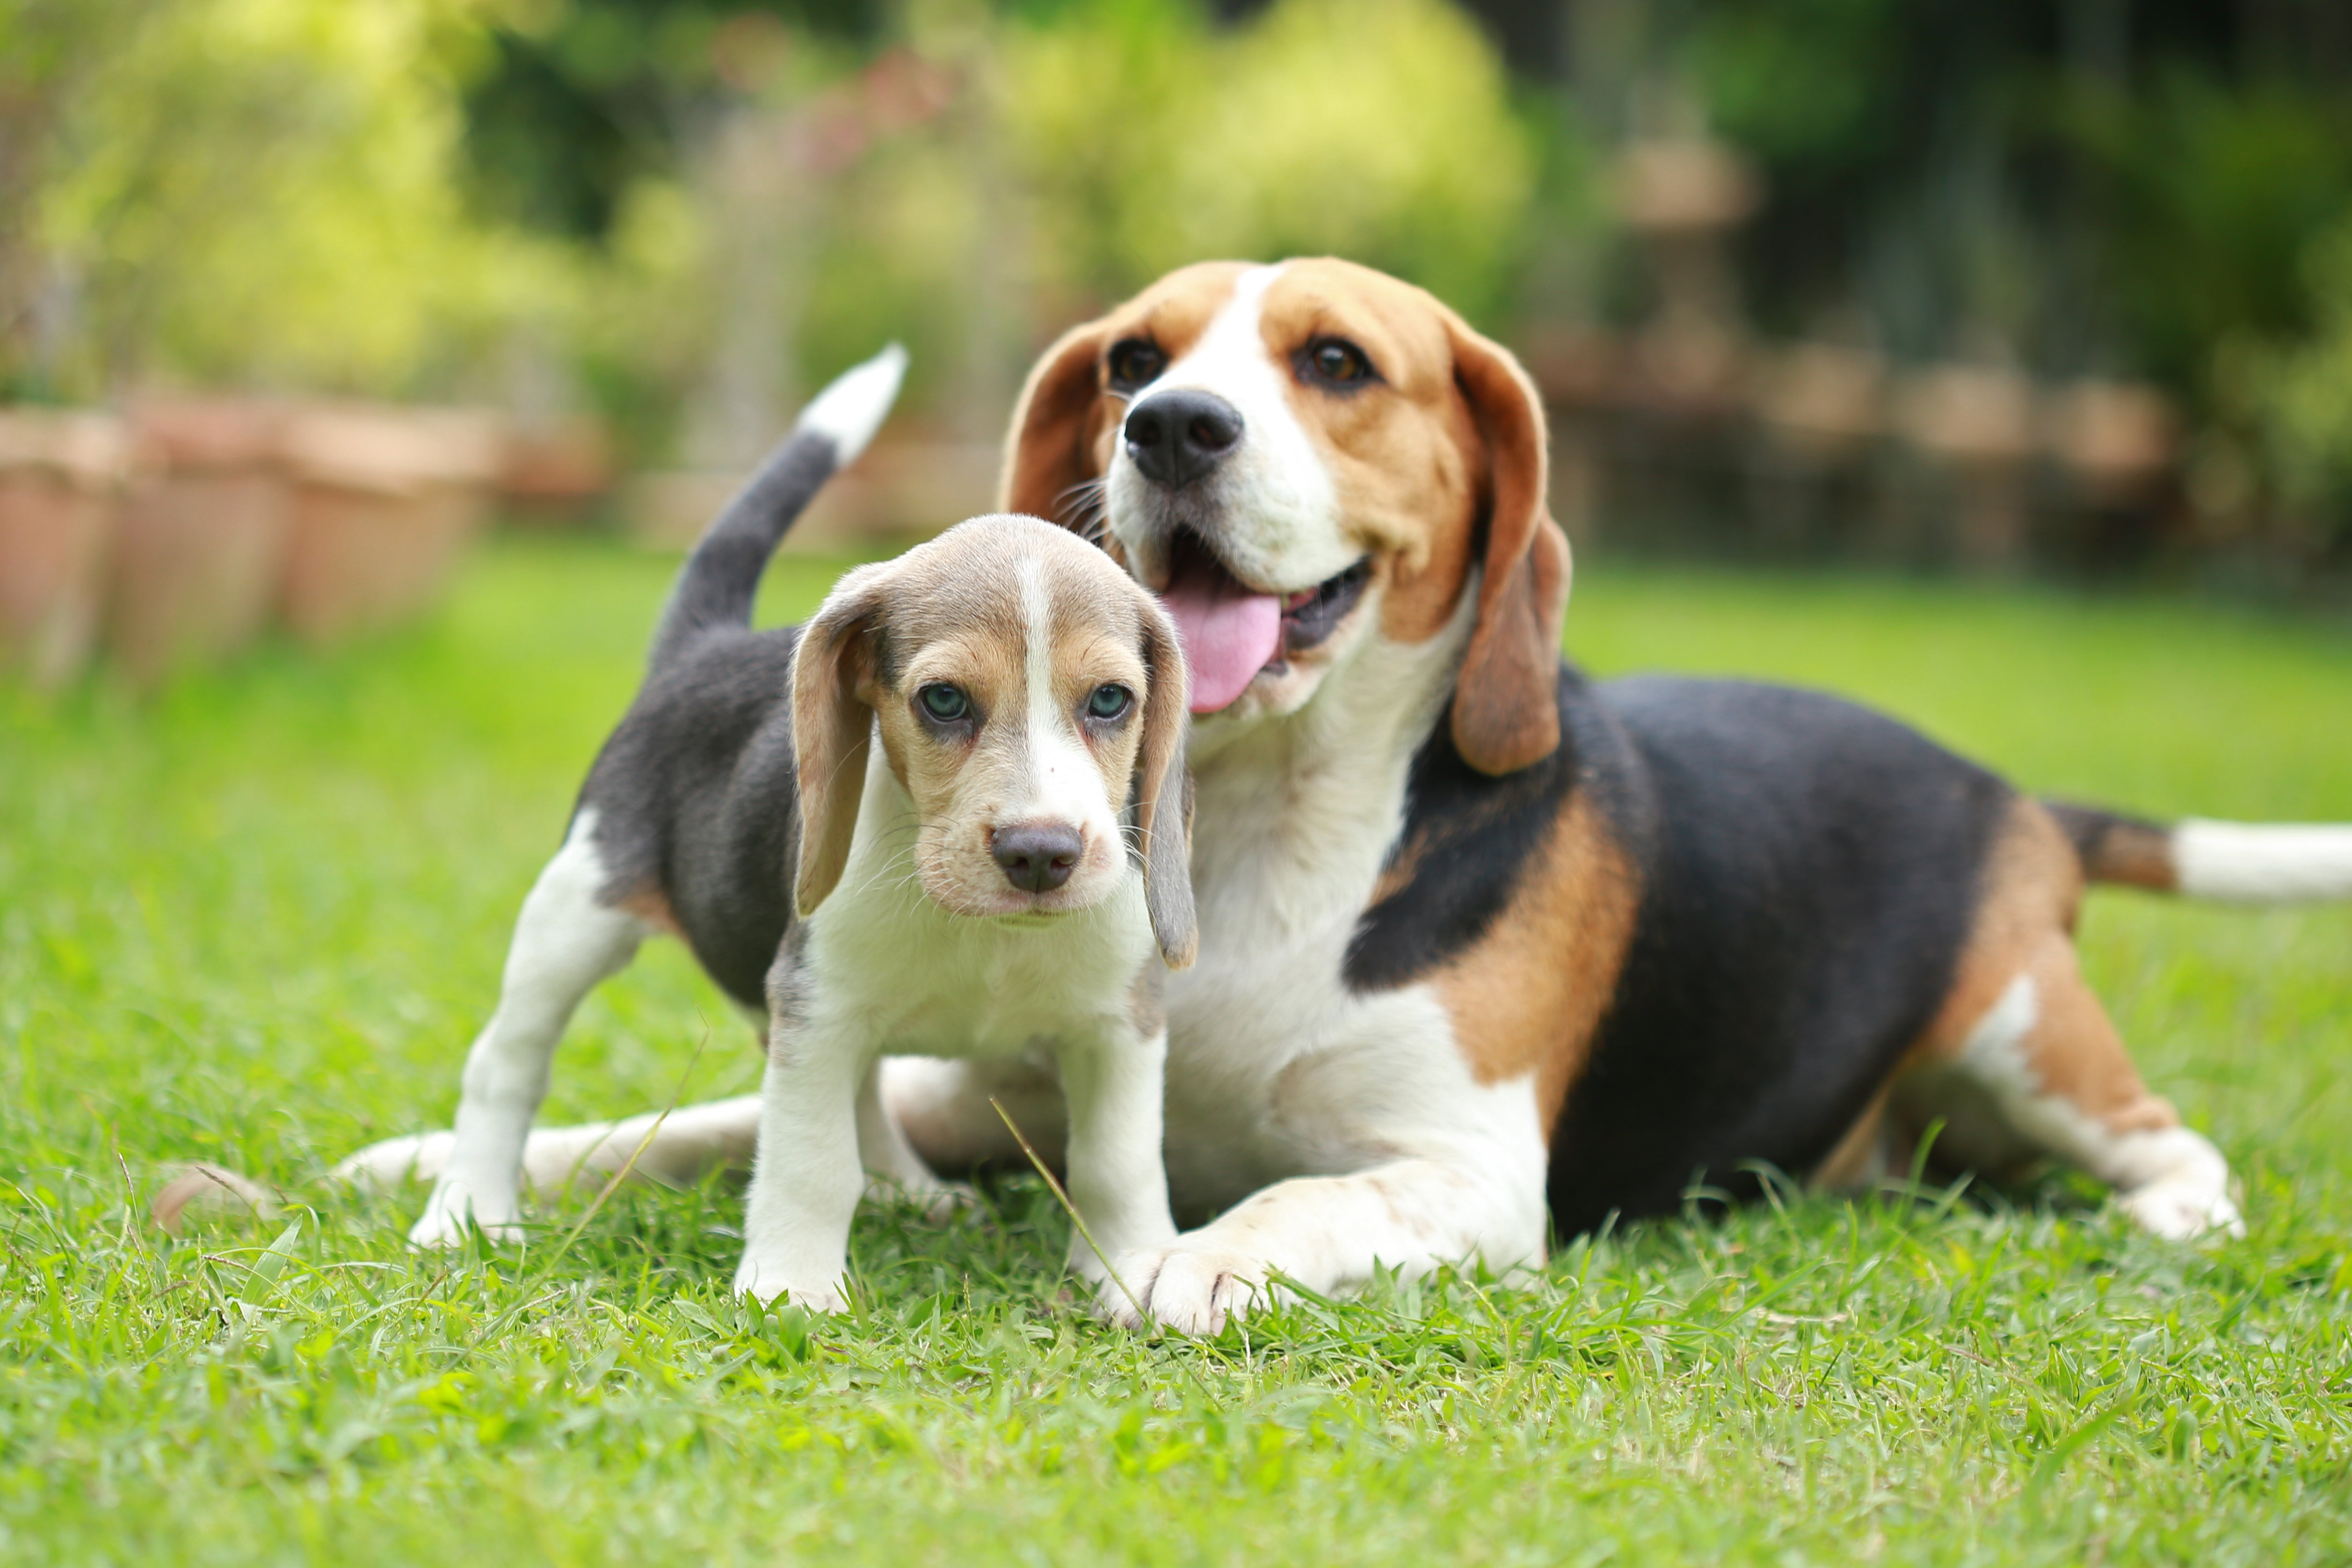 How to socialise your puppy: 10 top tips